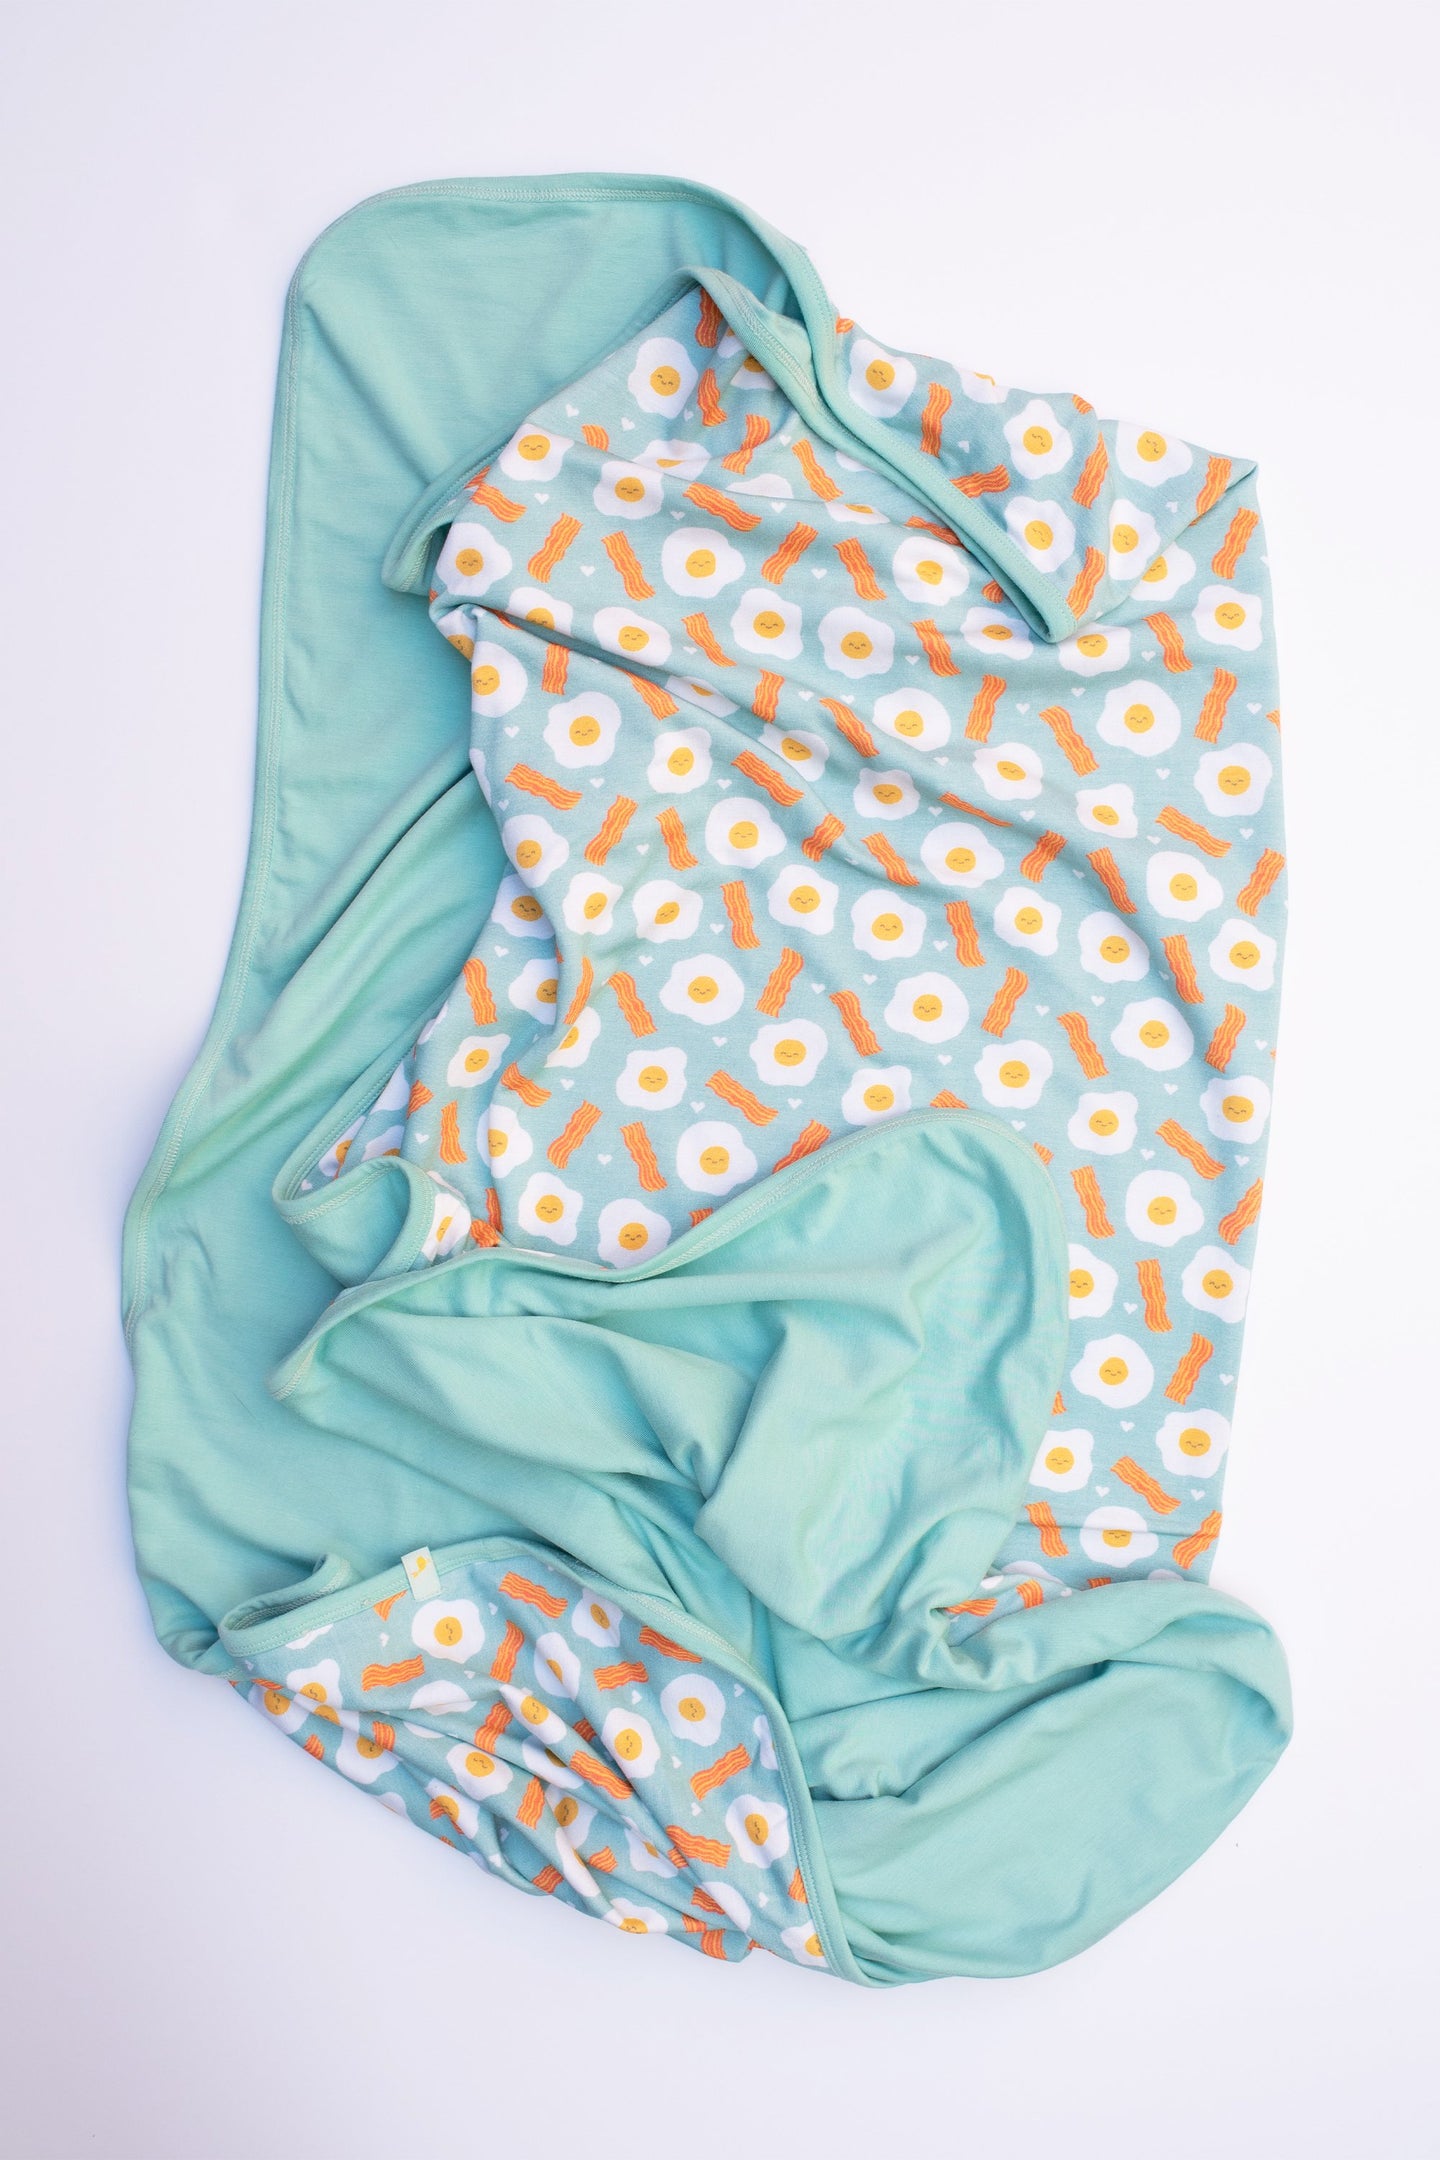 Clover - Bamboo Swaddle Blanket Bacon and Eggs